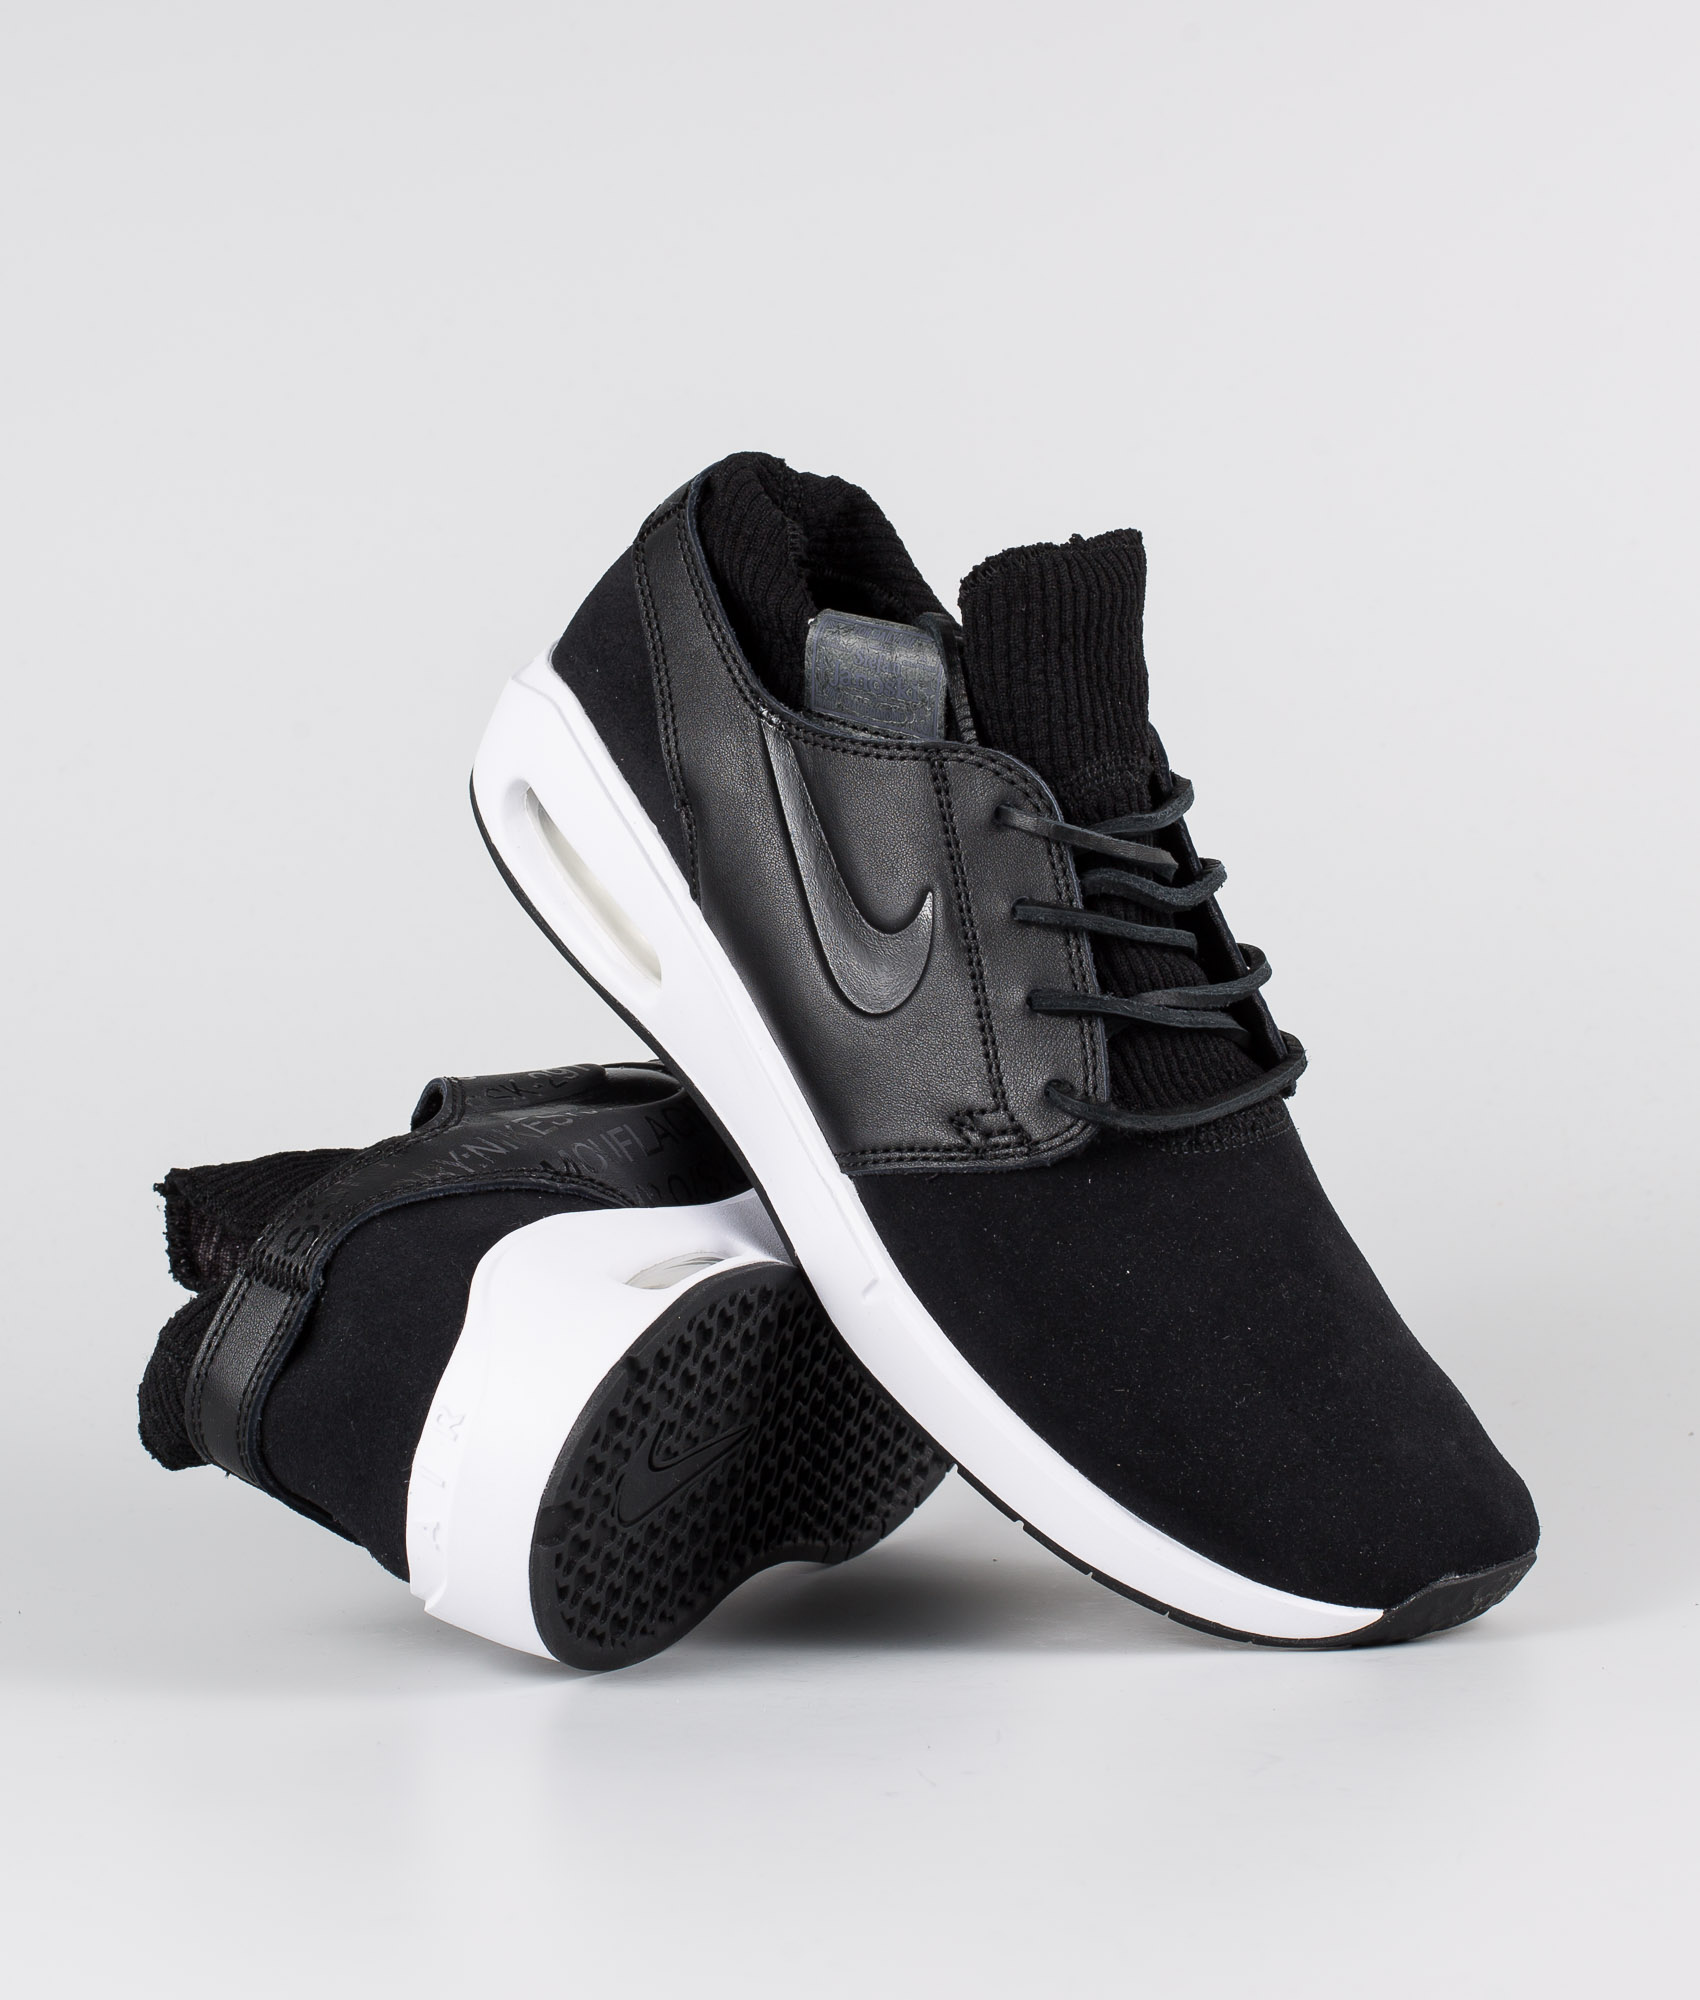 Nike Sb Air Max Janoski 2 Premium Outlet Online, UP TO 57% OFF